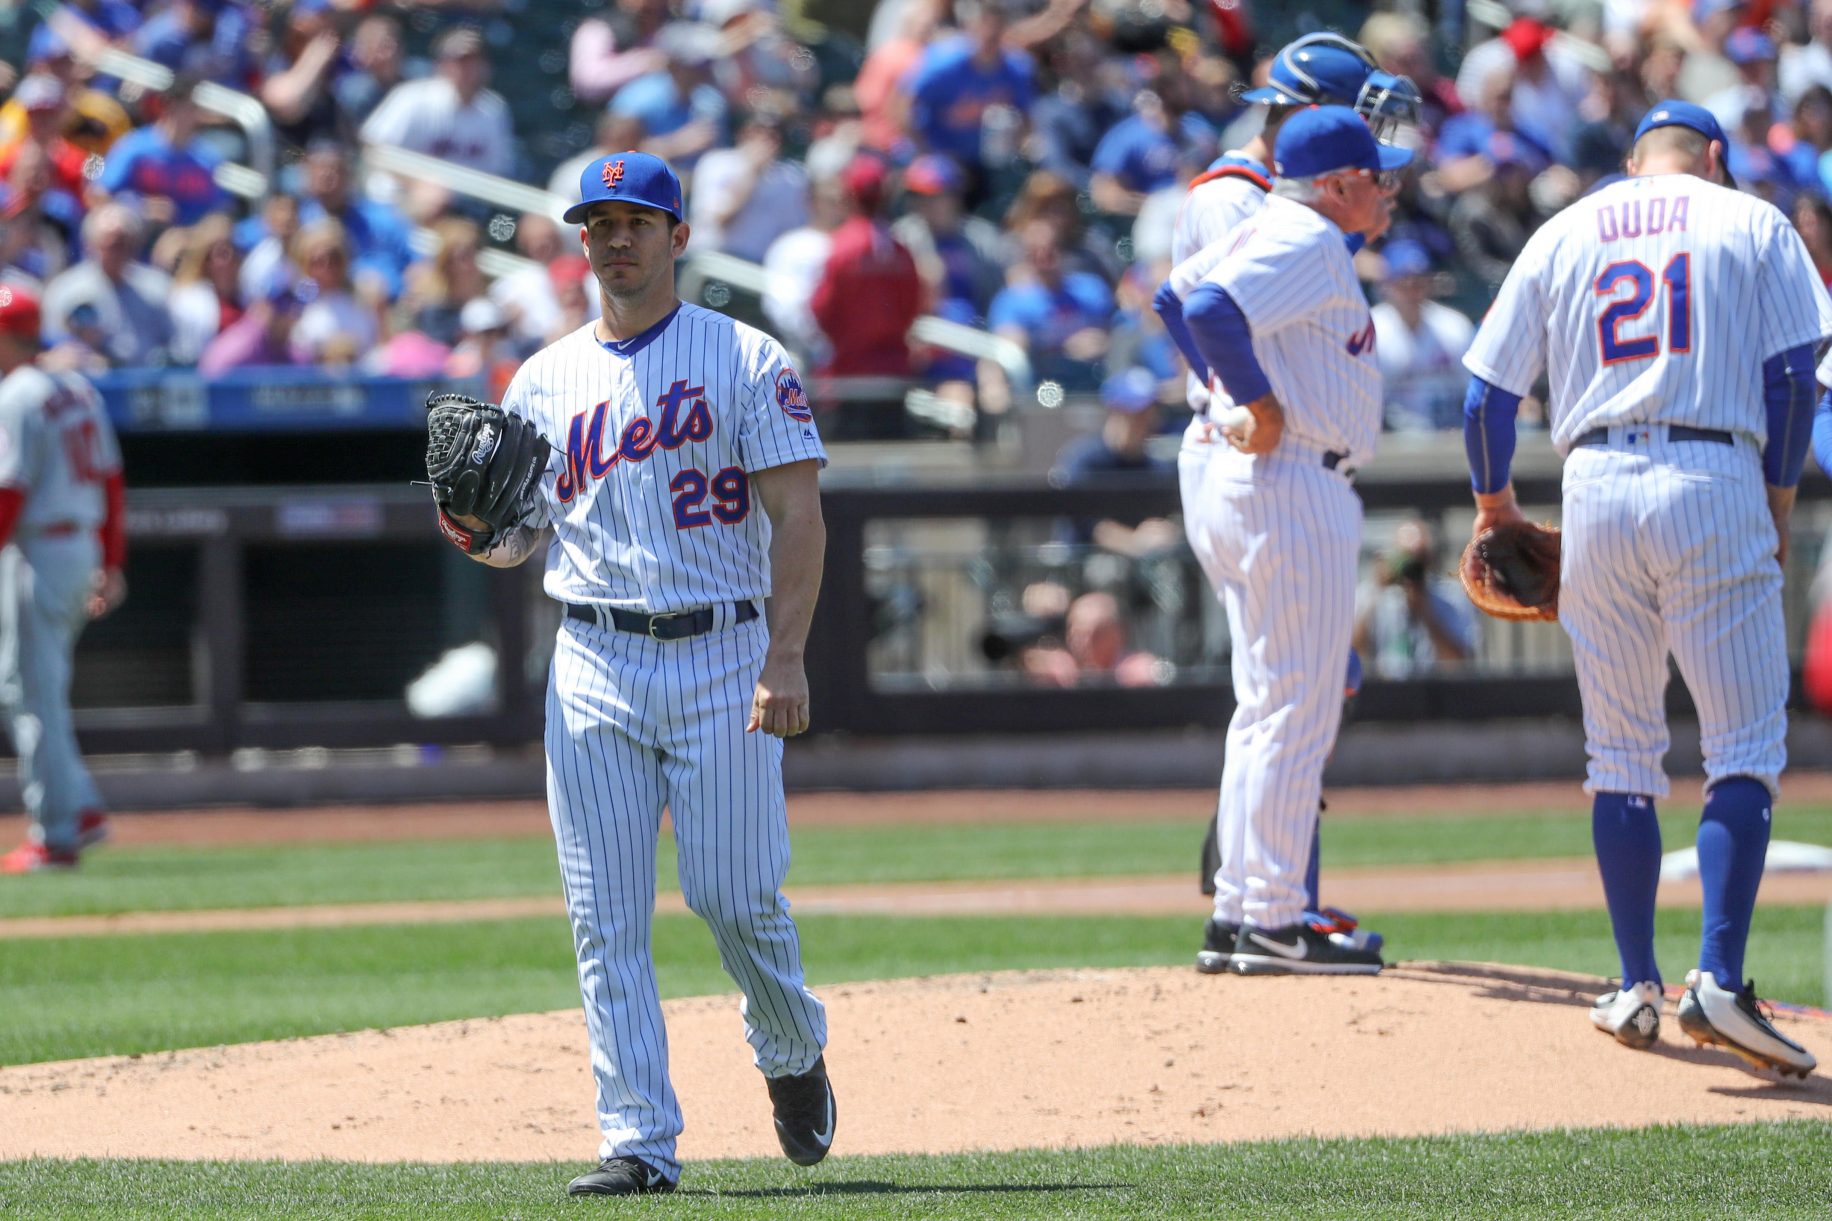 New York Mets Amazin' News, 5/22/17: 2-of-3, Another Setback for David Wright 